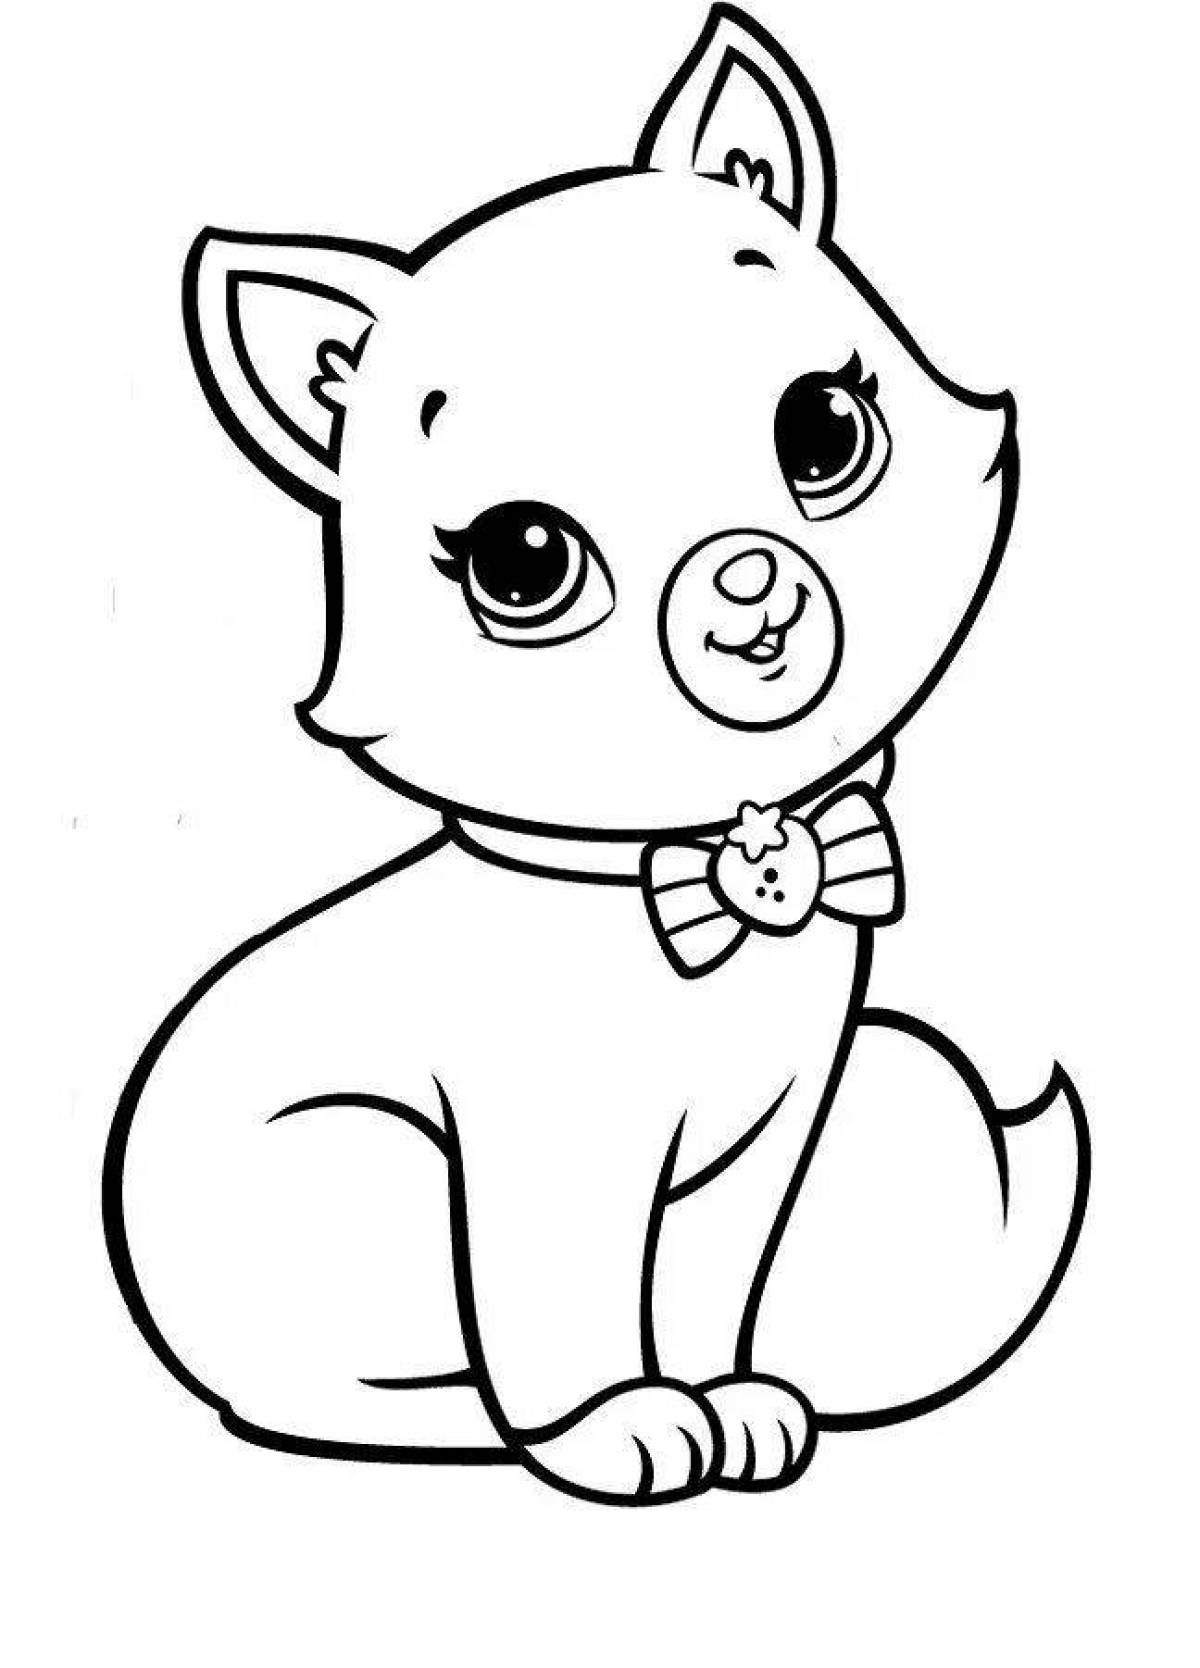 Coloring book inquisitive cat for kids